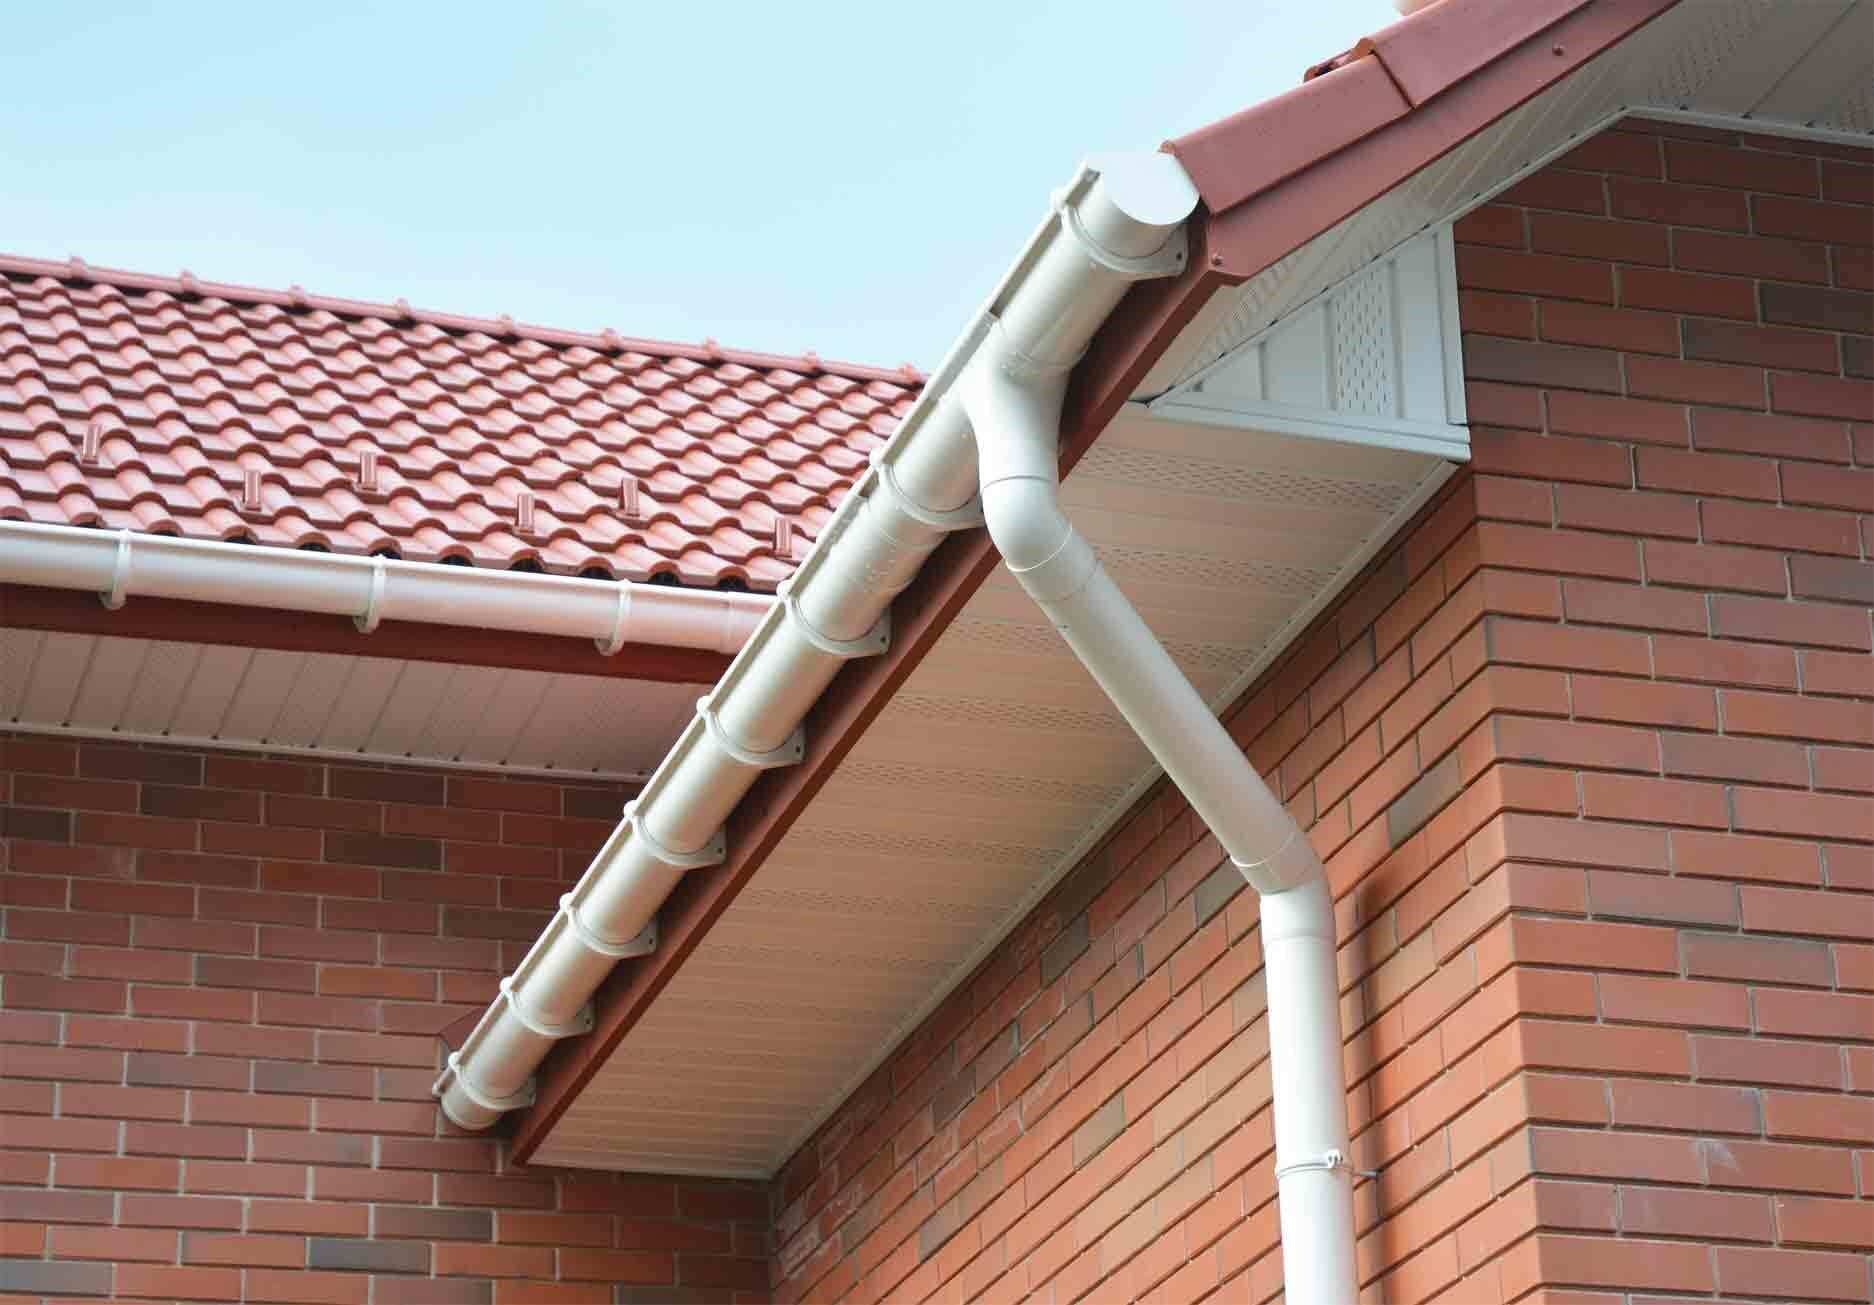 Gutter & Pipes — Exterior Pressure Cleaning In Bega Valley, NSW